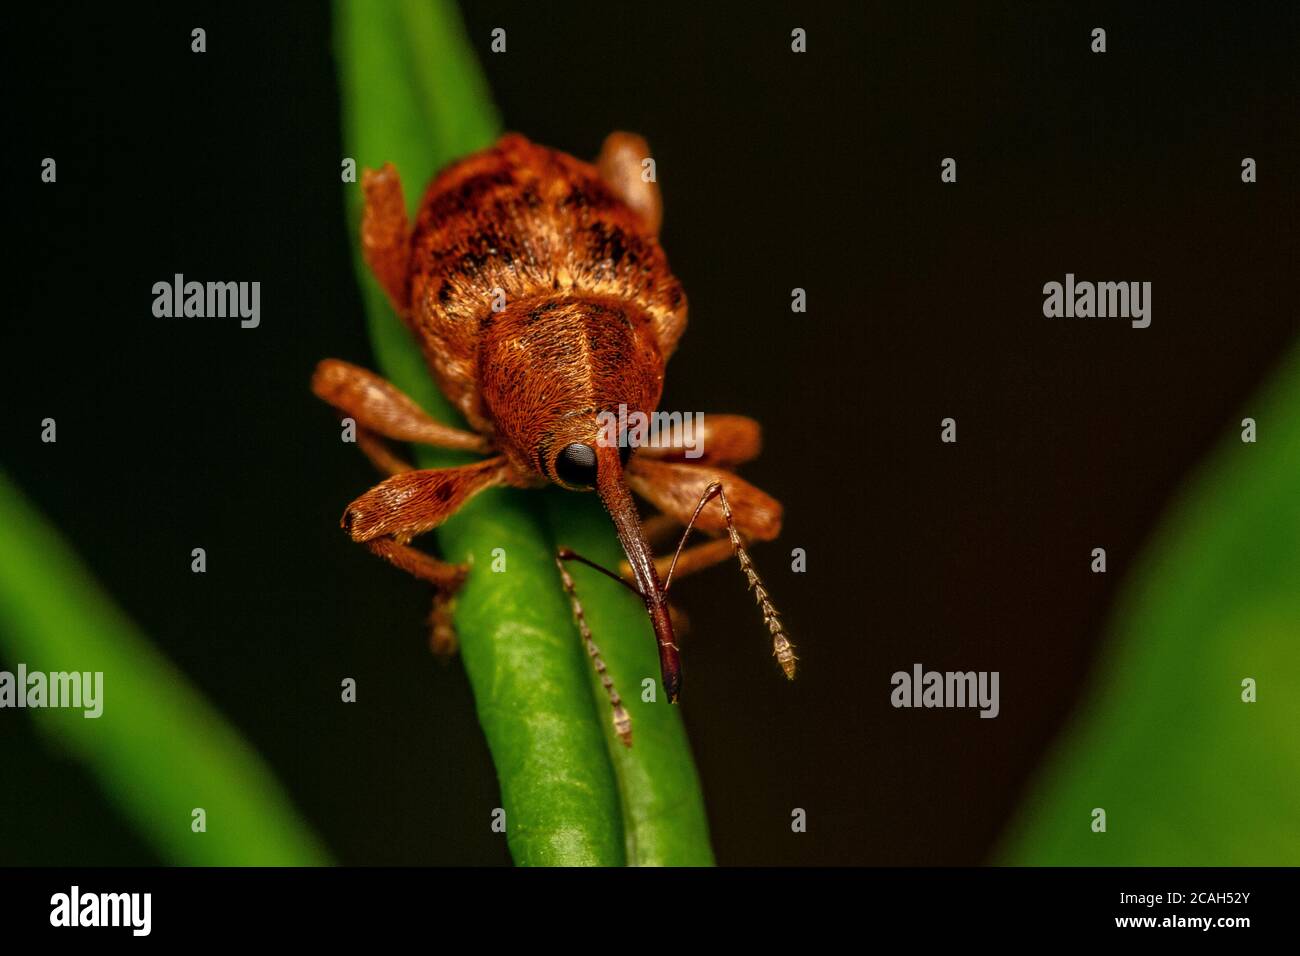 Acorn Weevil (Curculio glandium) male on leaf. This species is a common specialist of oak trees. Stock Photo